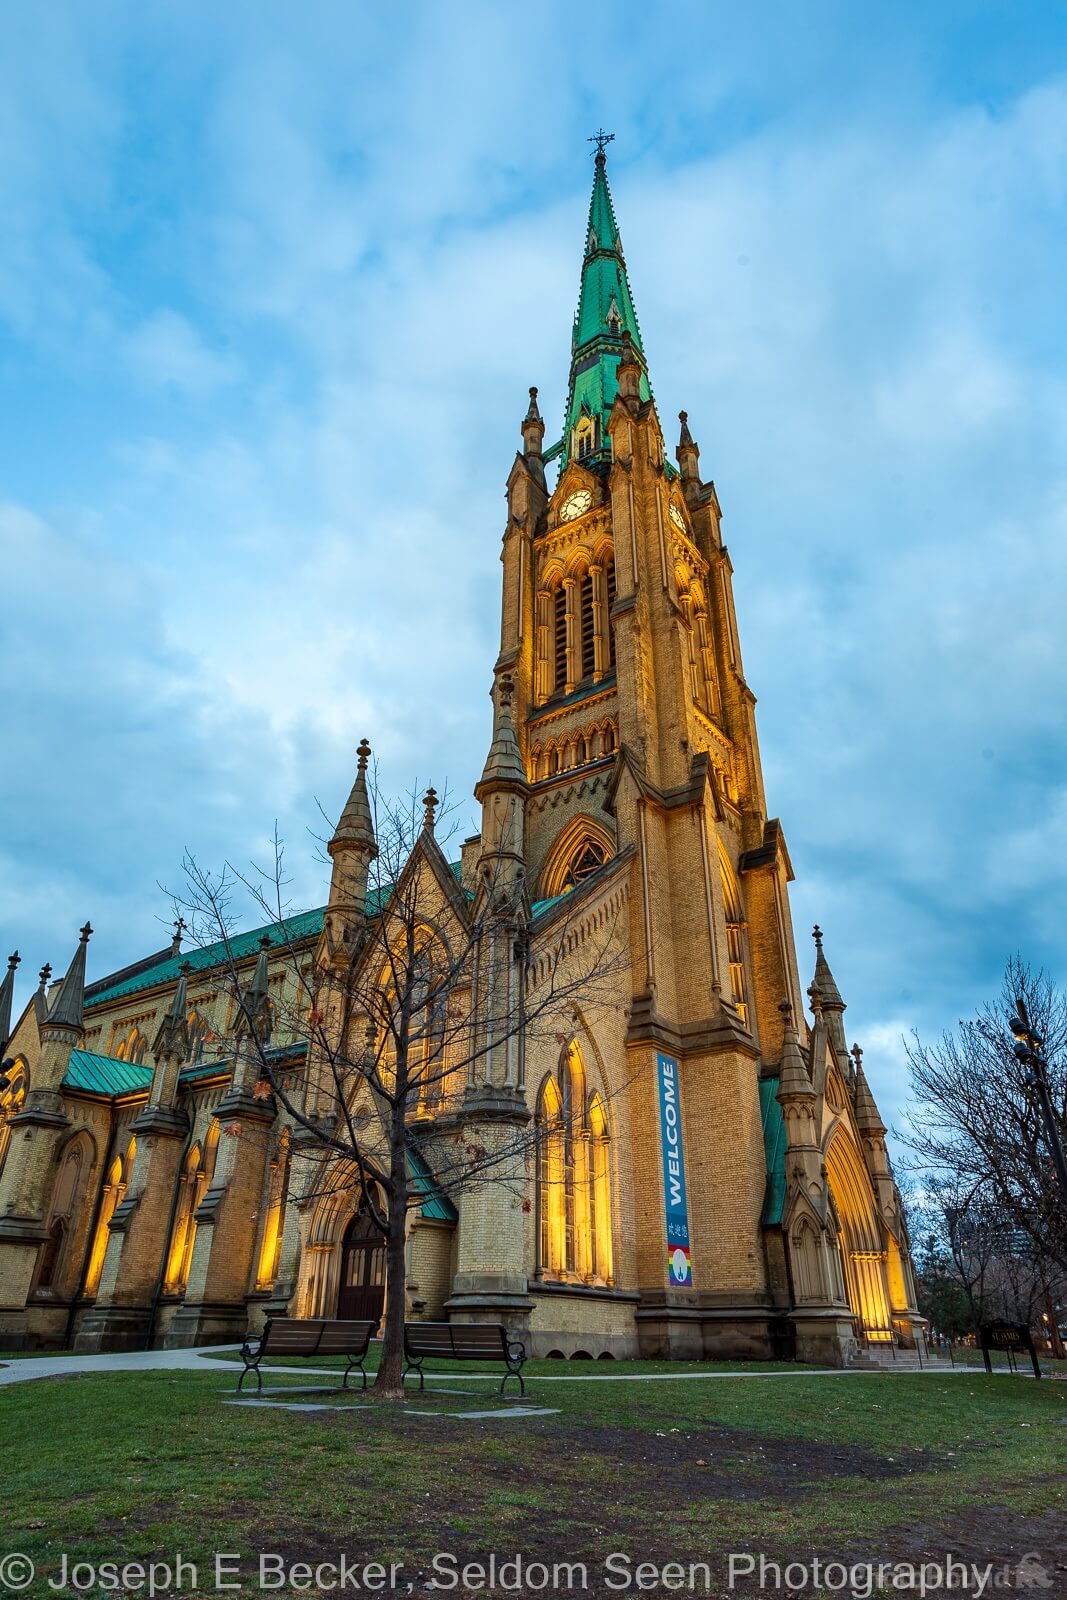 Image of St James Cathedral by Joe Becker